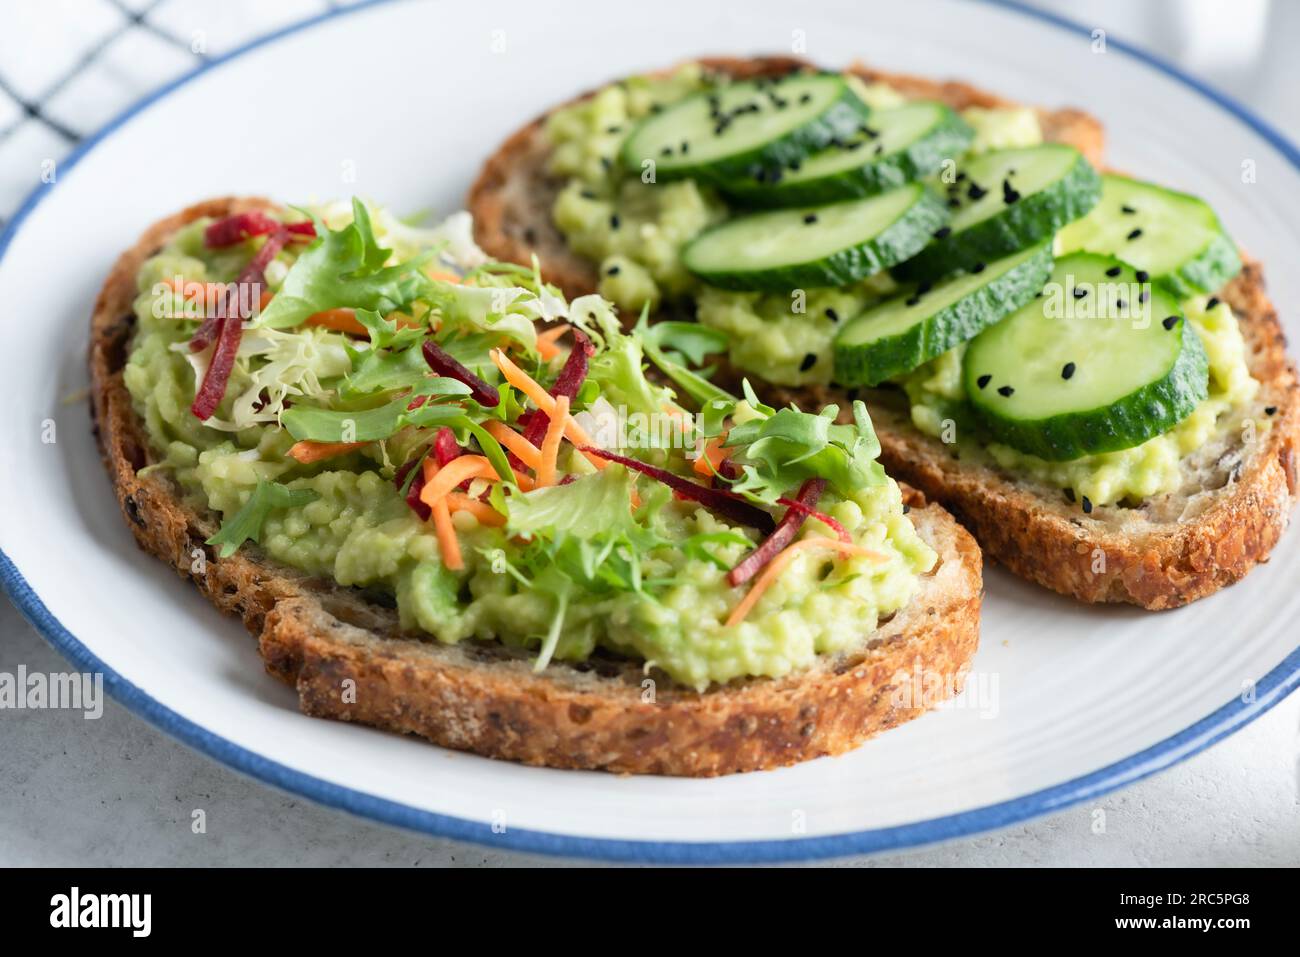 Avocado toast with different healthy vegan toppings. Cucumber, mixed greens, grated beet and carrot with seeds and olive oil. Healthy food Stock Photo